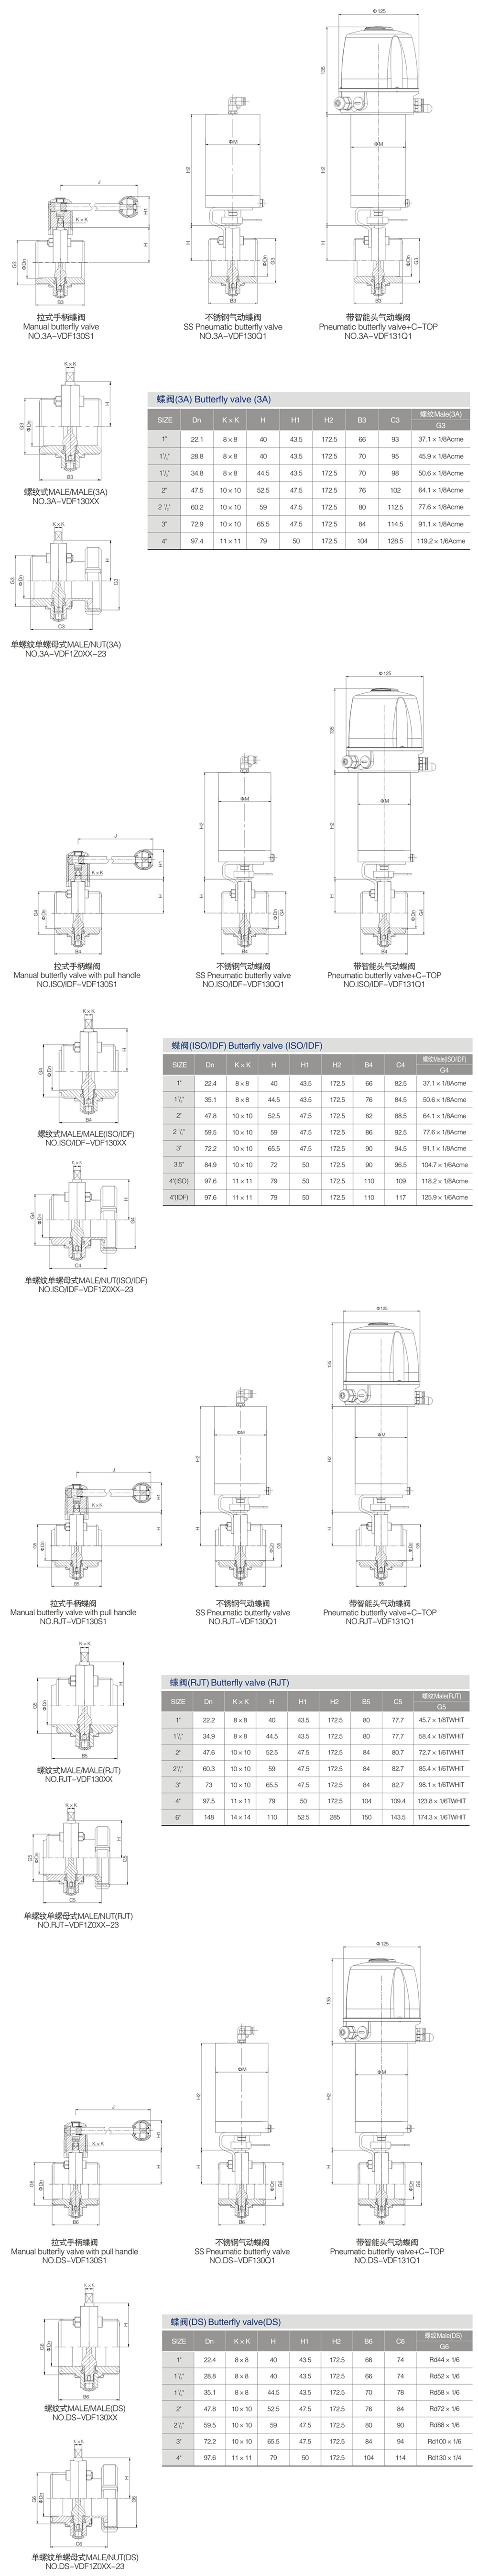 Sanitary Stainless Steel Manual Butterfly Threaded Valve with EPDM Seal